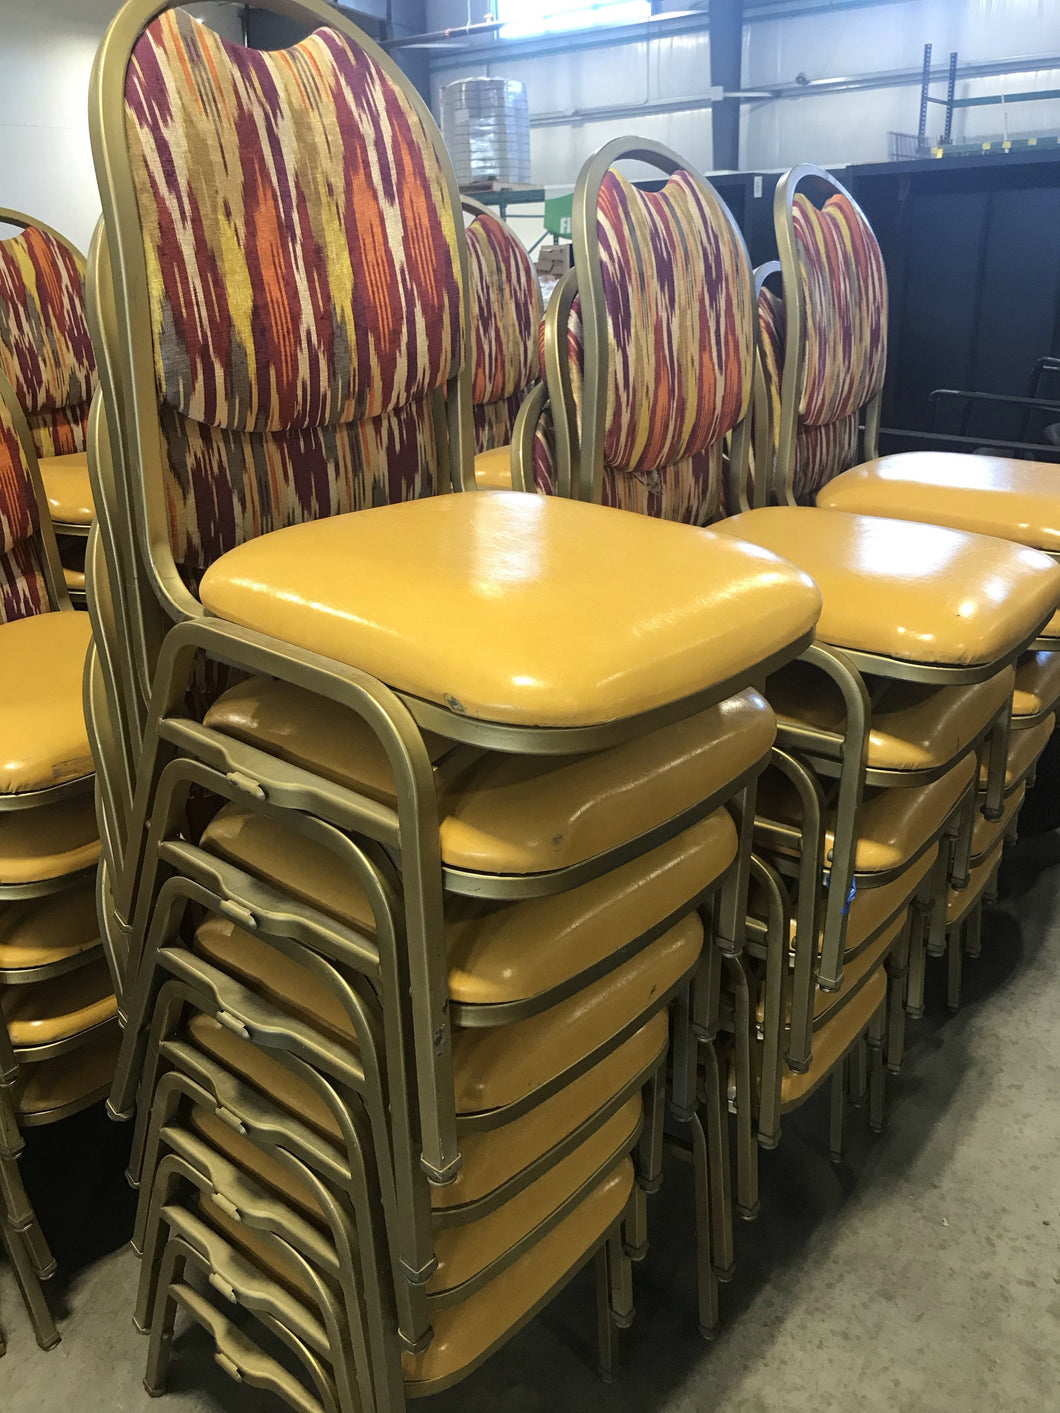 Stackable Chairs - Kenner Habitat for Humanity ReStore